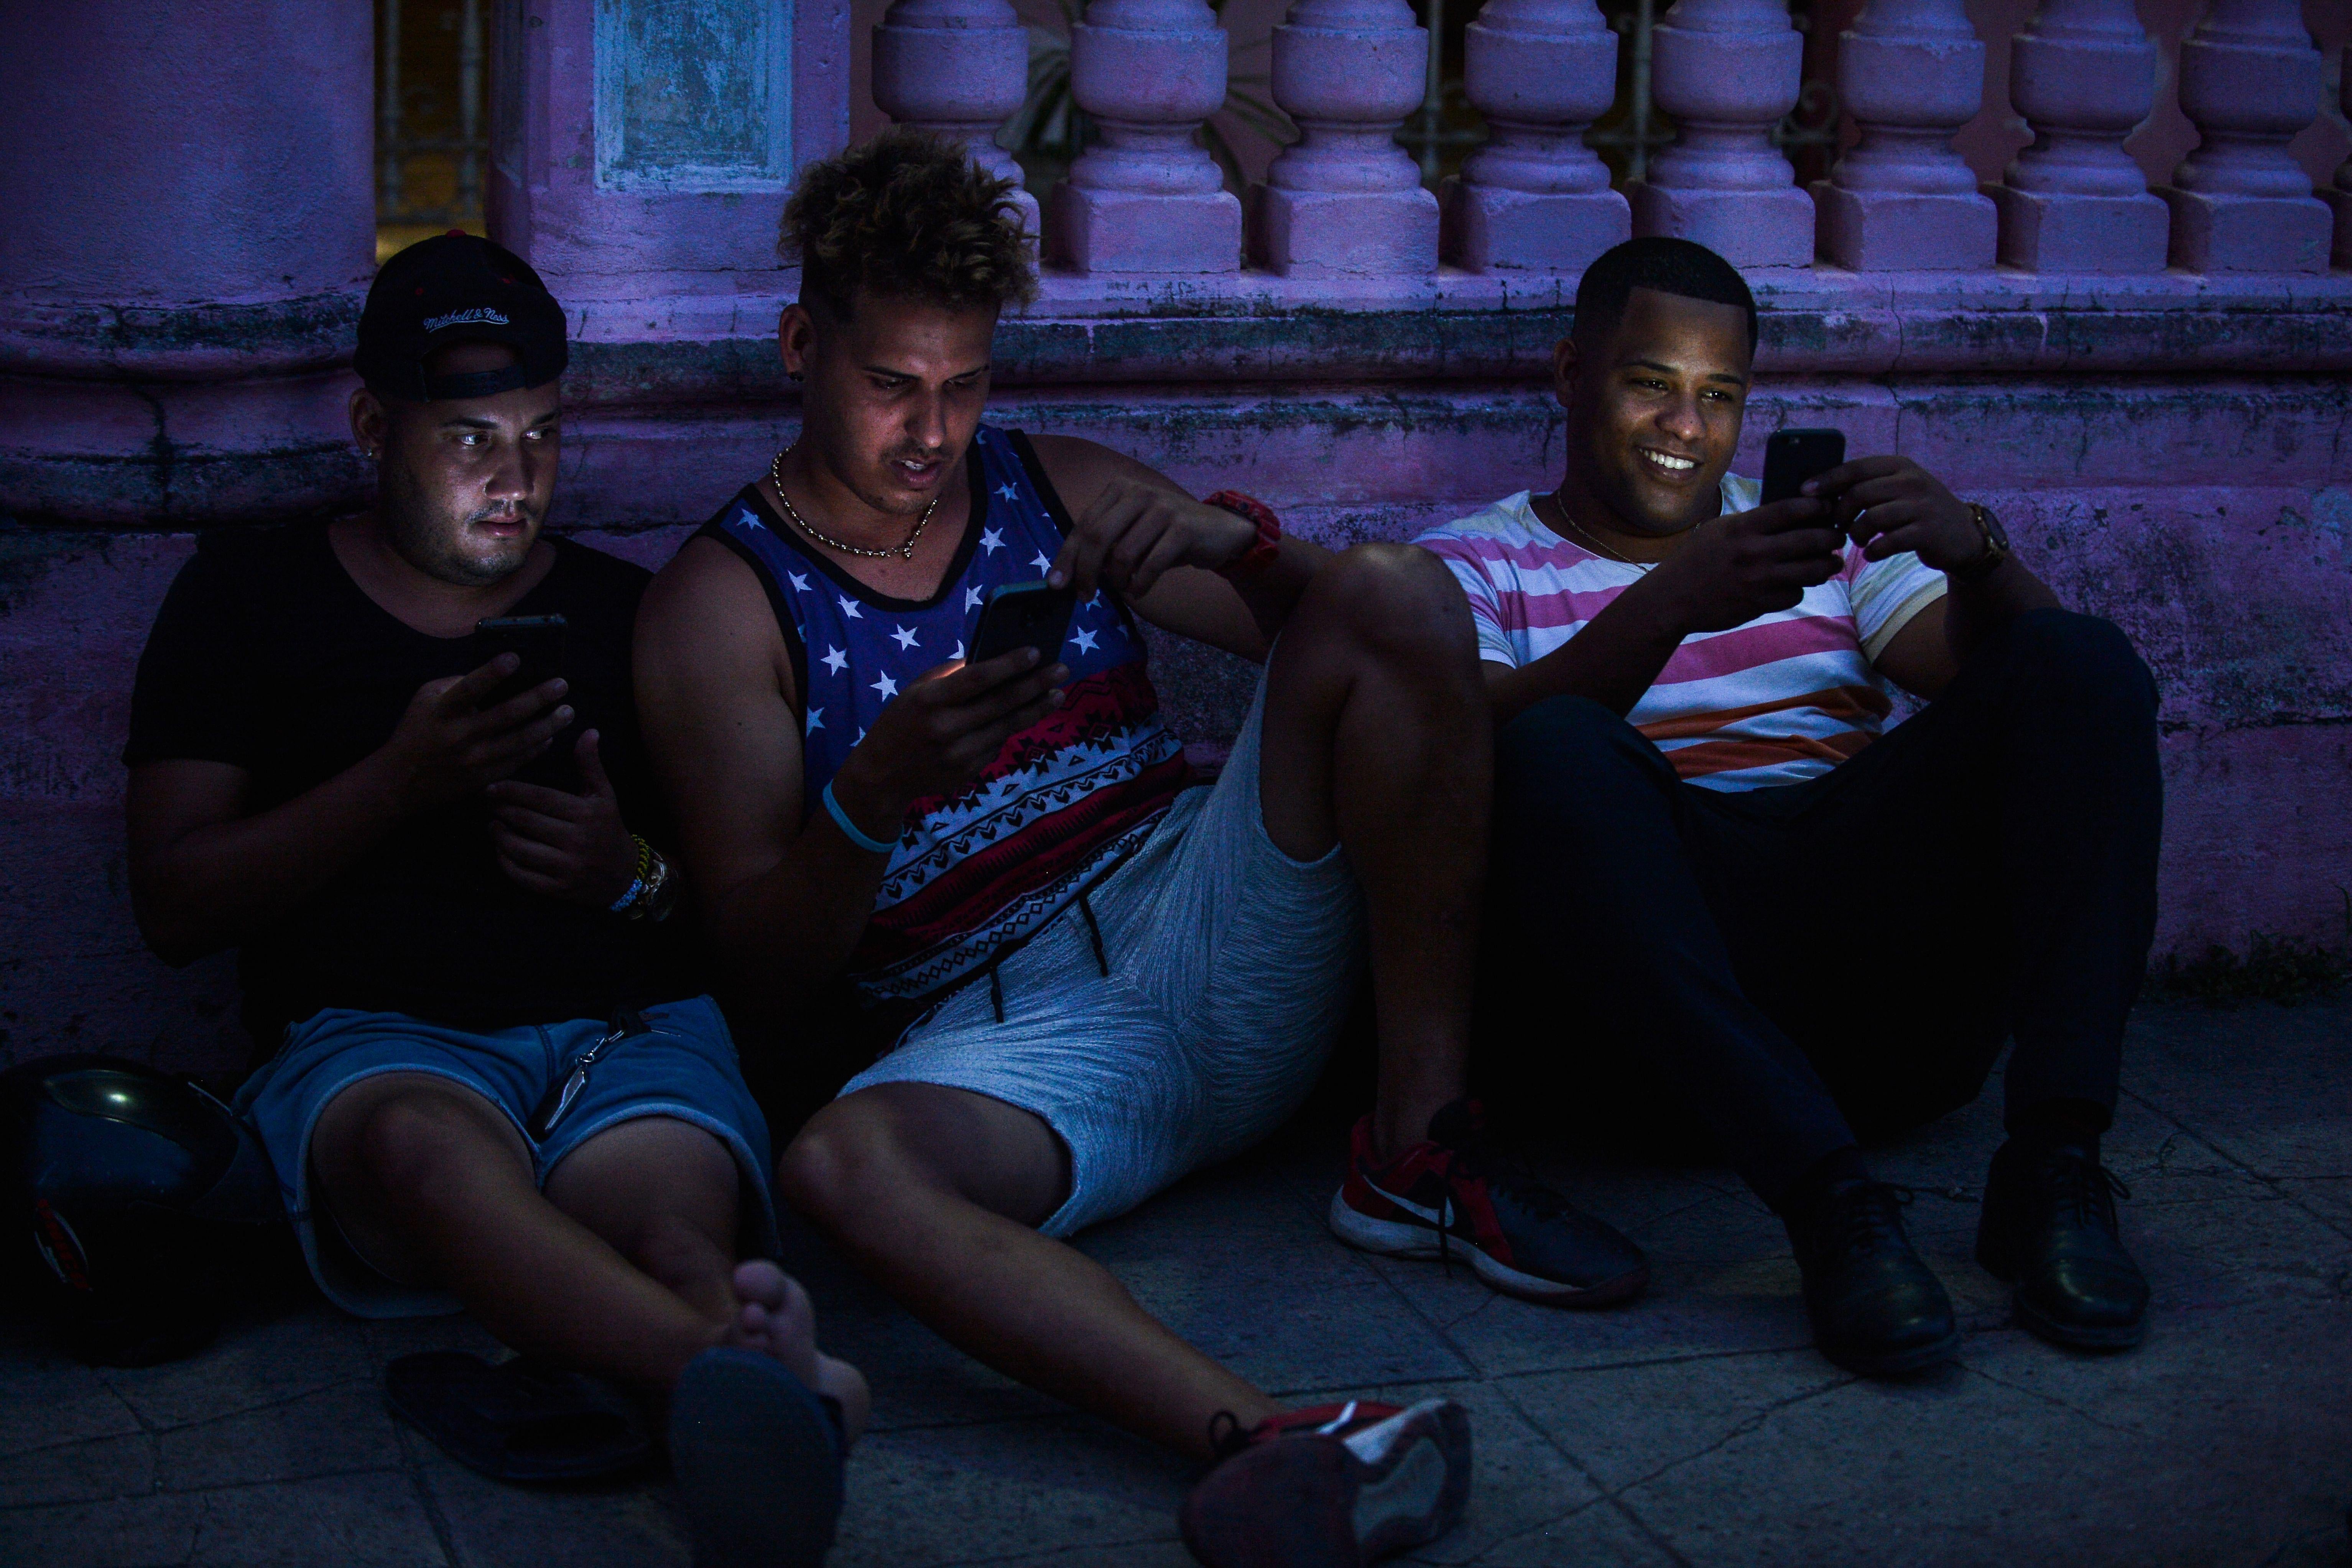 Three young men sitting on the sidewalk look at cellphones.